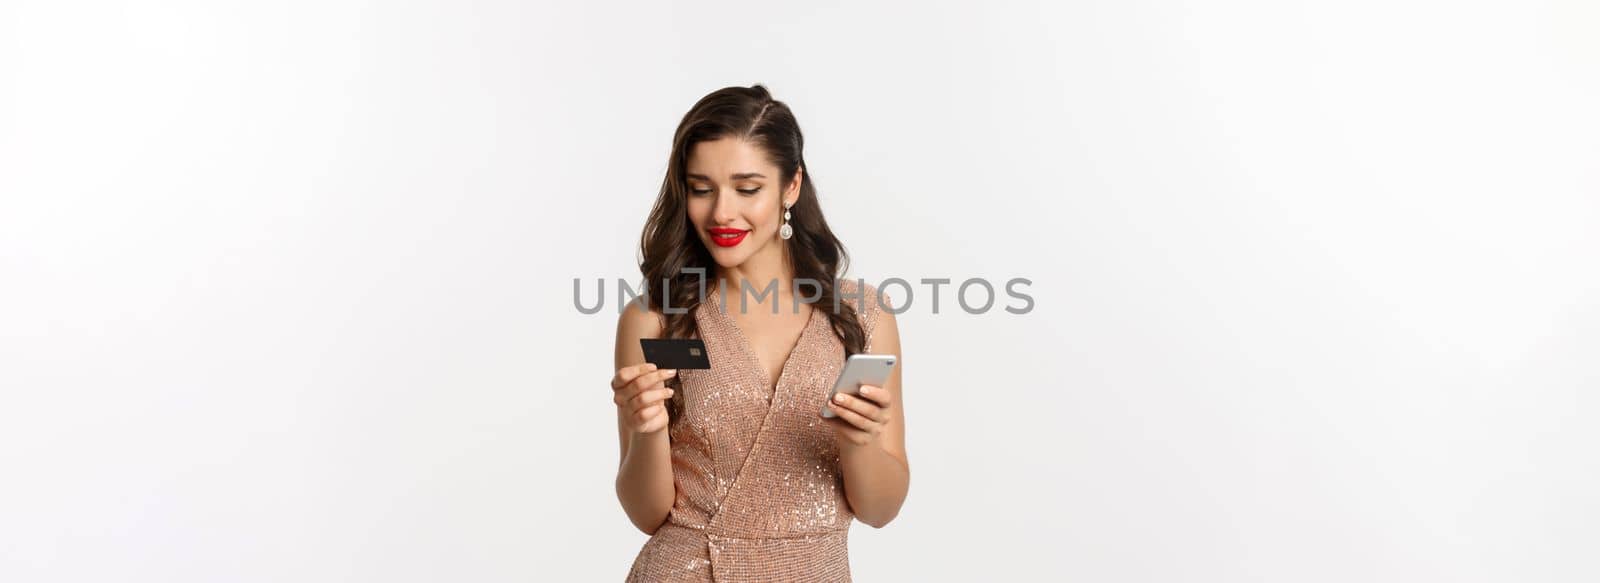 Online shopping and christmas concept. Elegant young woman paying for internet purchase with smartphone and credit card, standing in luxury dress over white background.